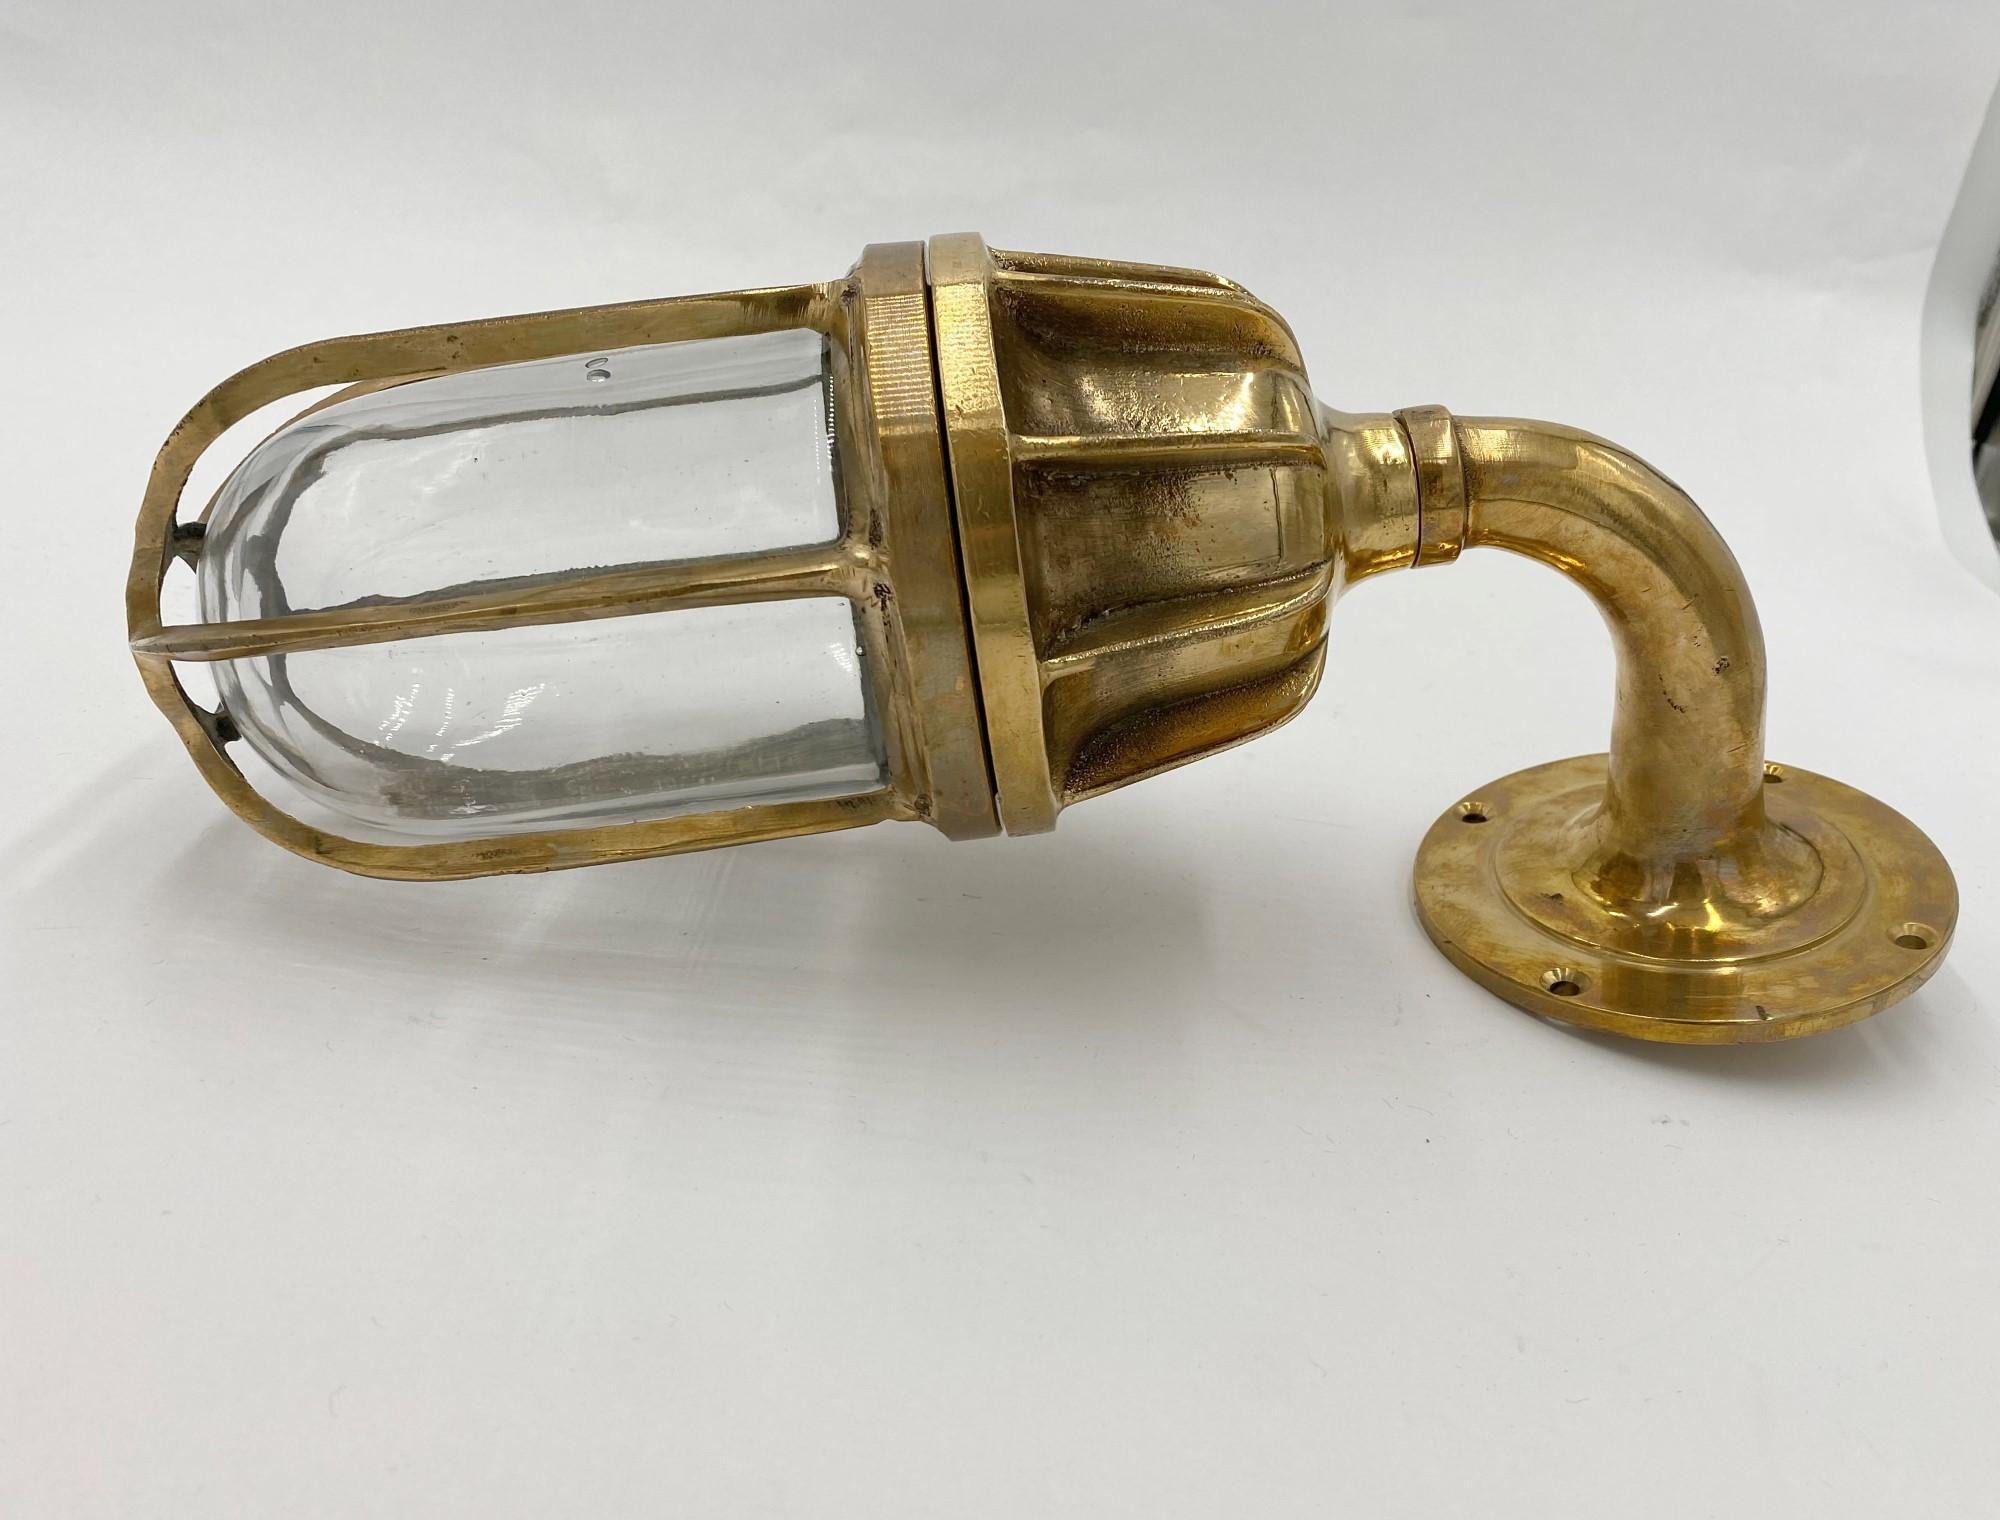 Solid brass ship sconce with a 90 degree bend, vane top, and glass globe. Cleaned and rewired. Small quantity available at time of posting. Please inquire. Priced each. Please note, this item is located in one of our NYC locations.